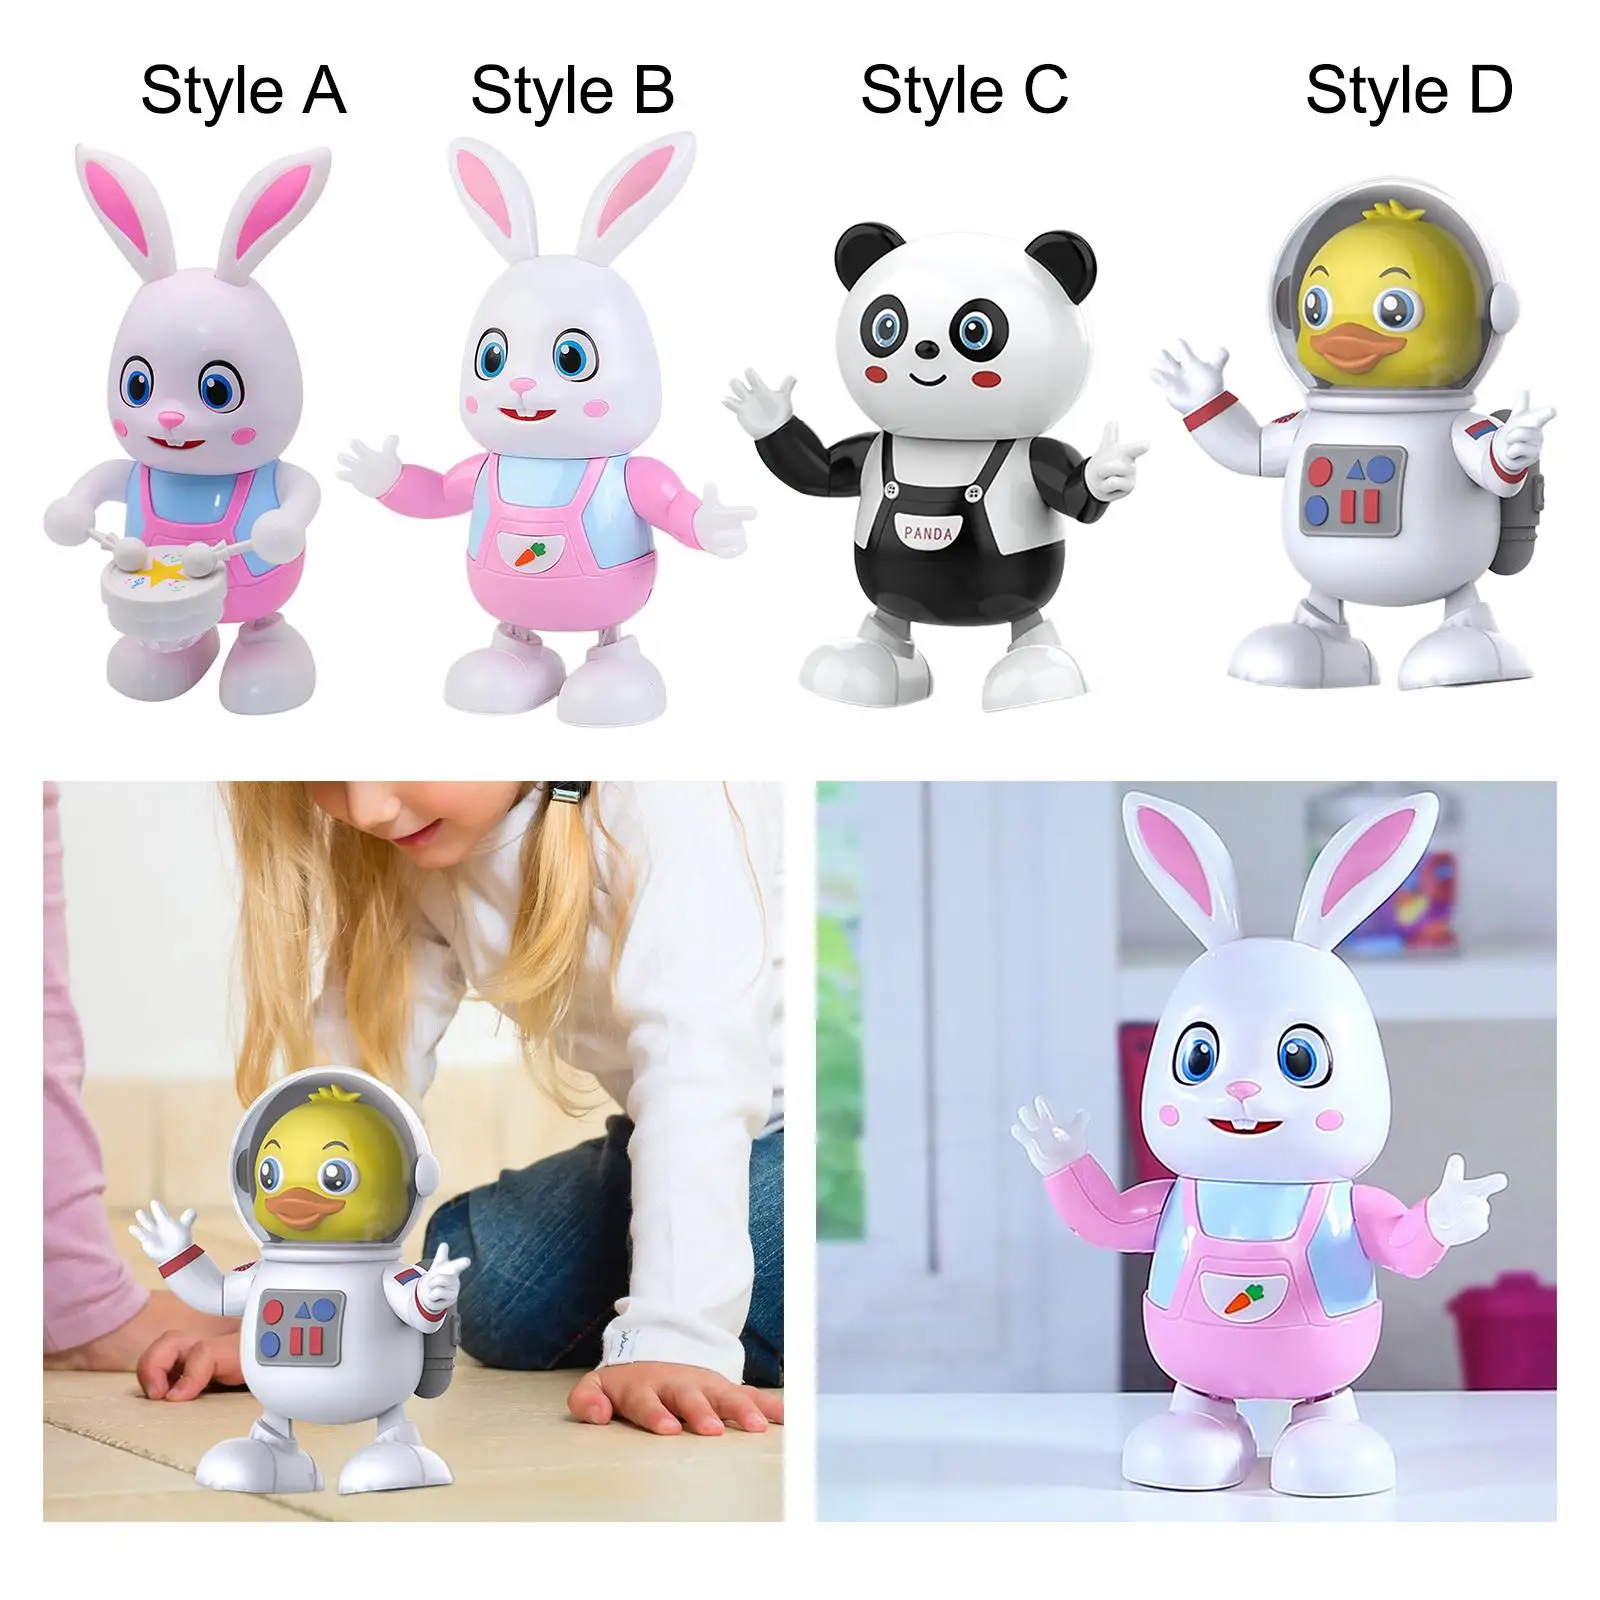 Lighting Music Toy Funny Cute Learning Educational Development Toy Dancing Toy Electric Toy for 3+ Year Old Girls Kids Toddlers